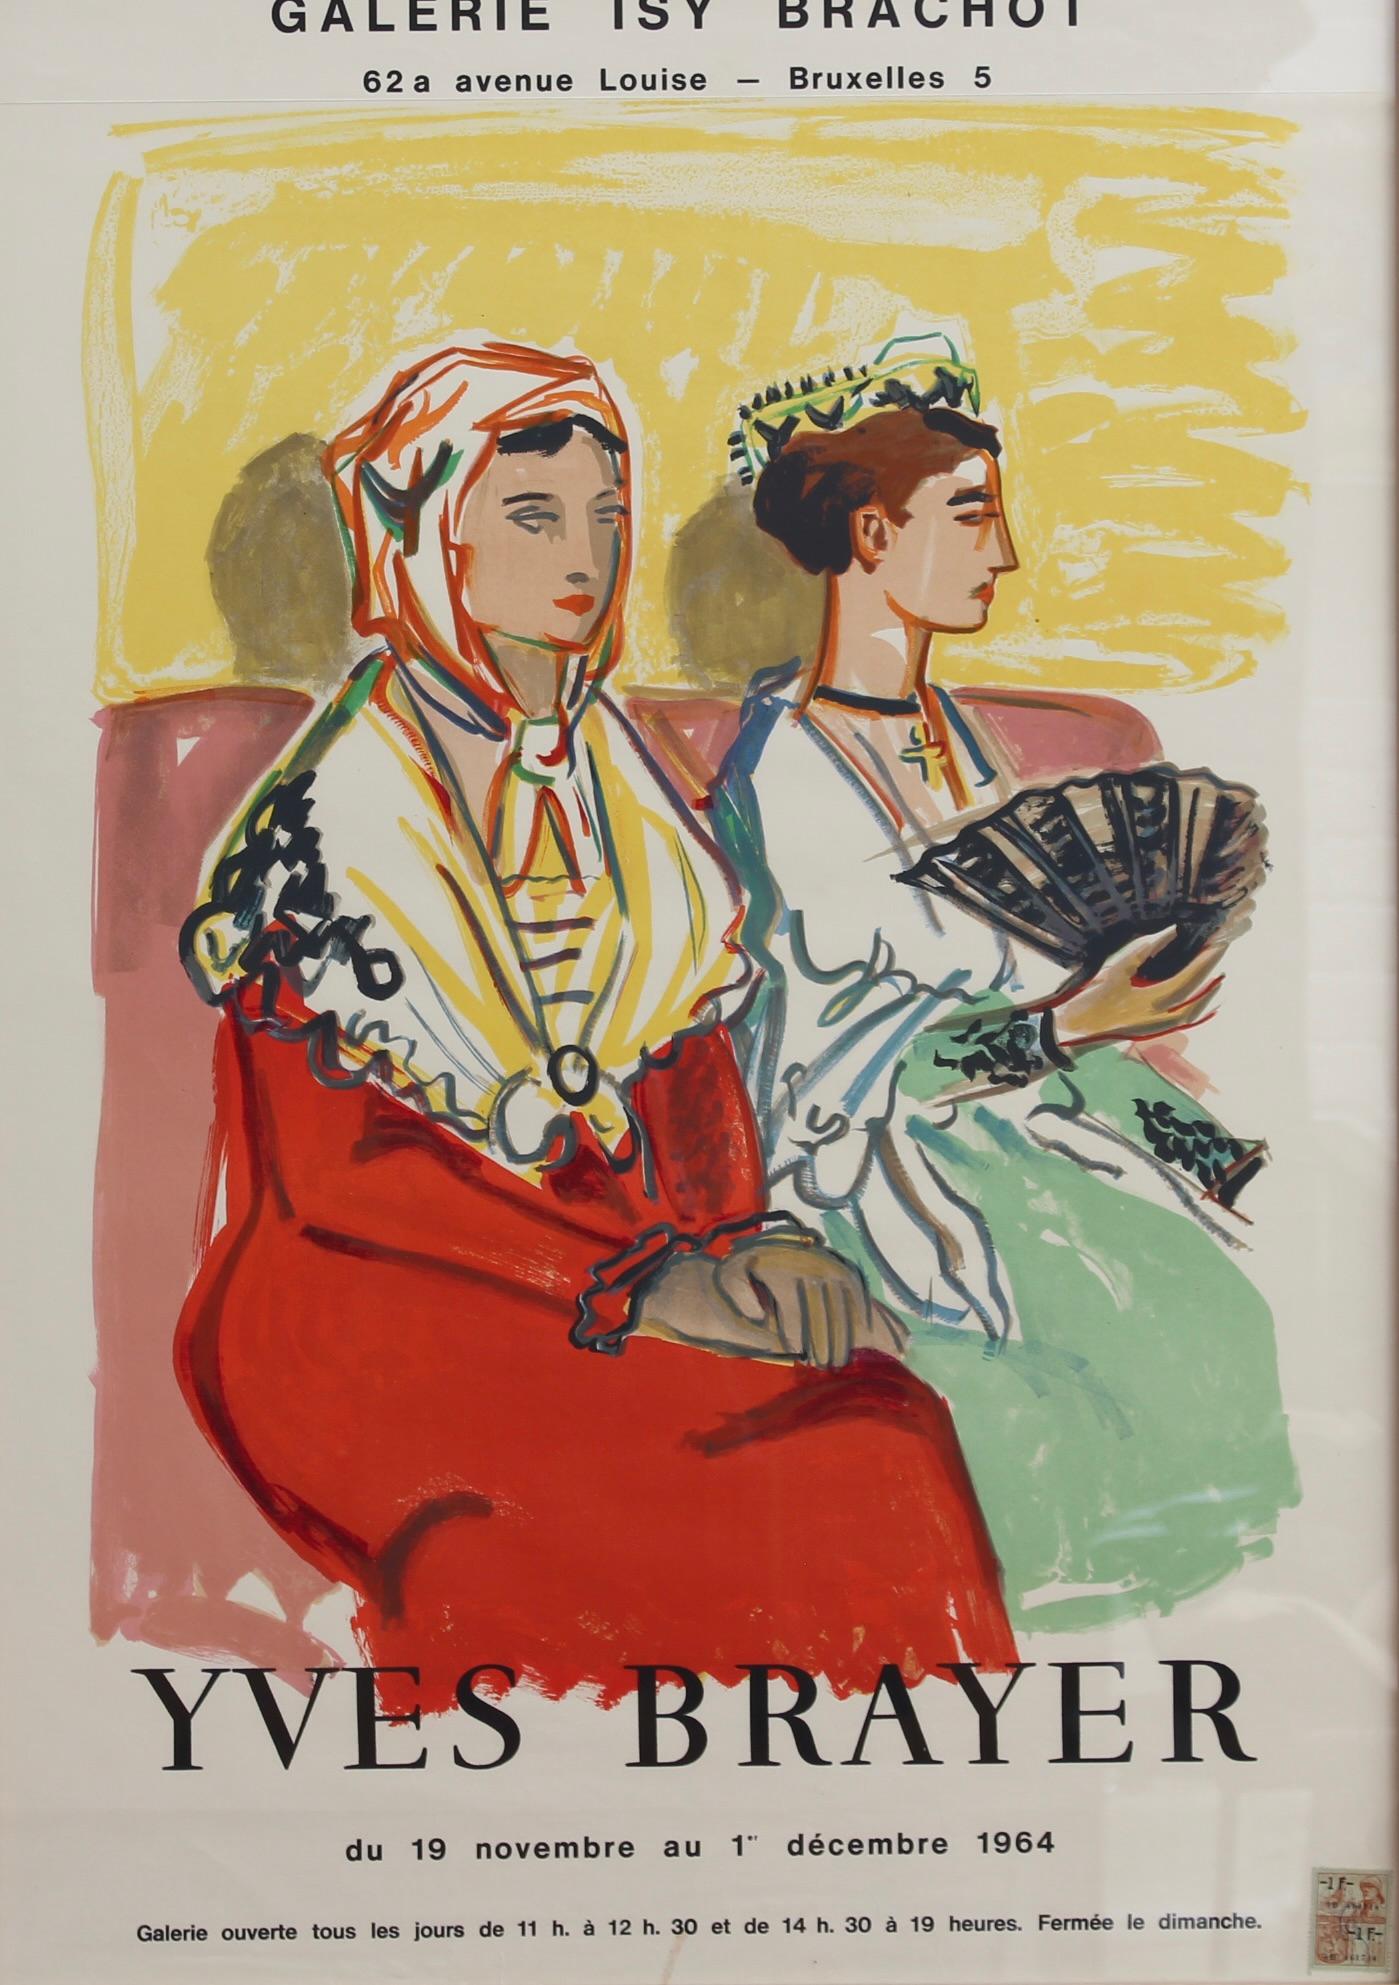 French Vintage Exhibition Poster for Yves Brayer - Galerie Isy Brachot Brussels For Sale 1